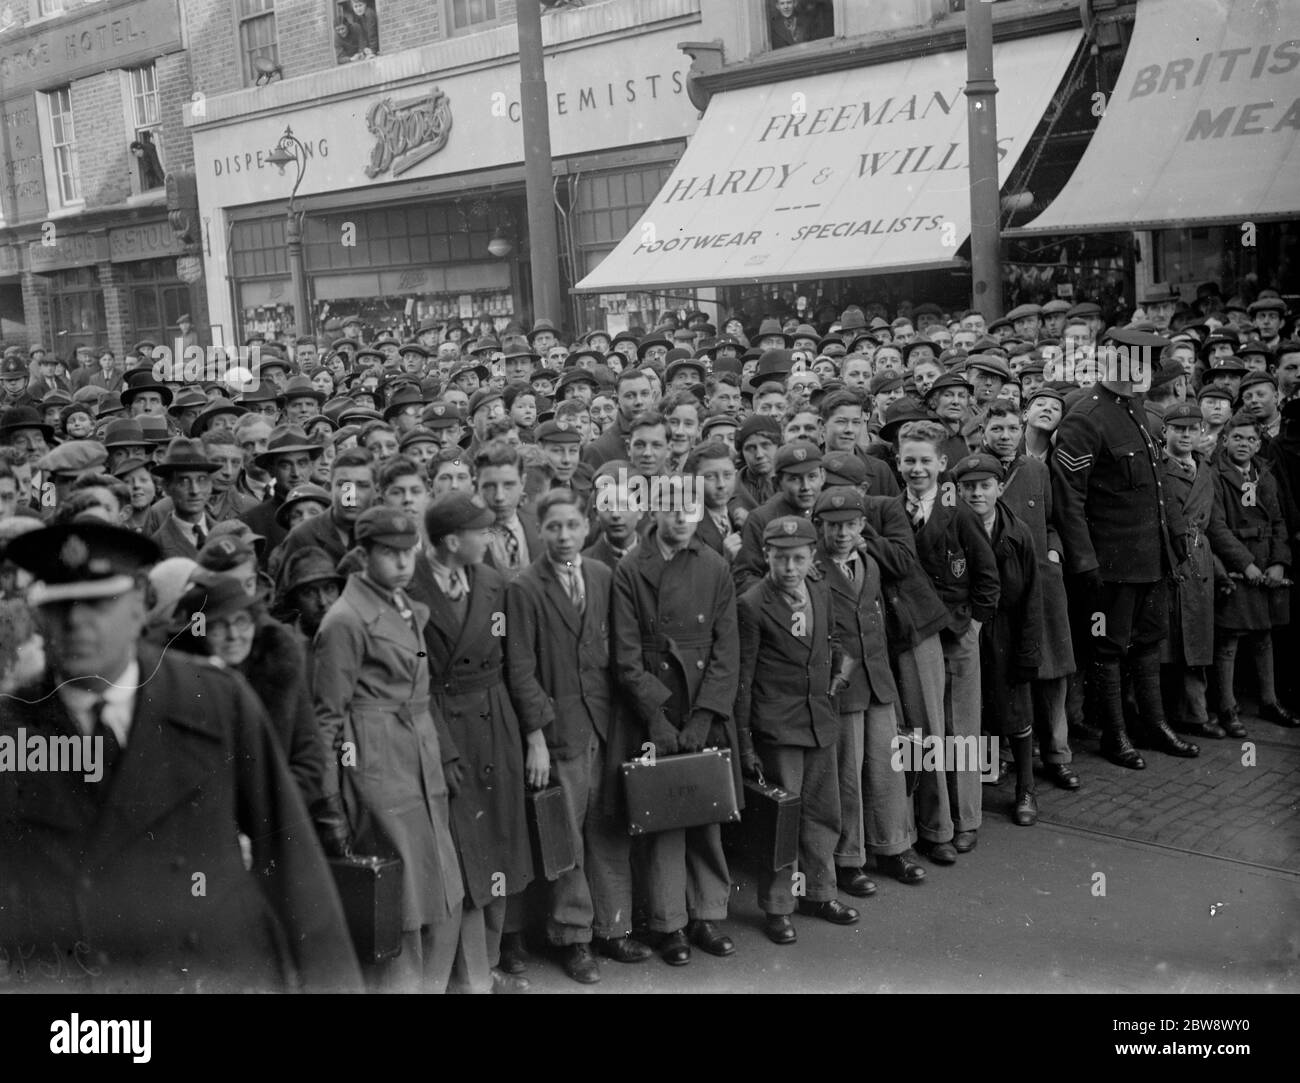 Announcing the new King in Dartford . A crowd of people including many schoolboys listen while the Royal Proclamation of the accession of Edward VIII is read out in Dartford , Kent . 1936 Stock Photo